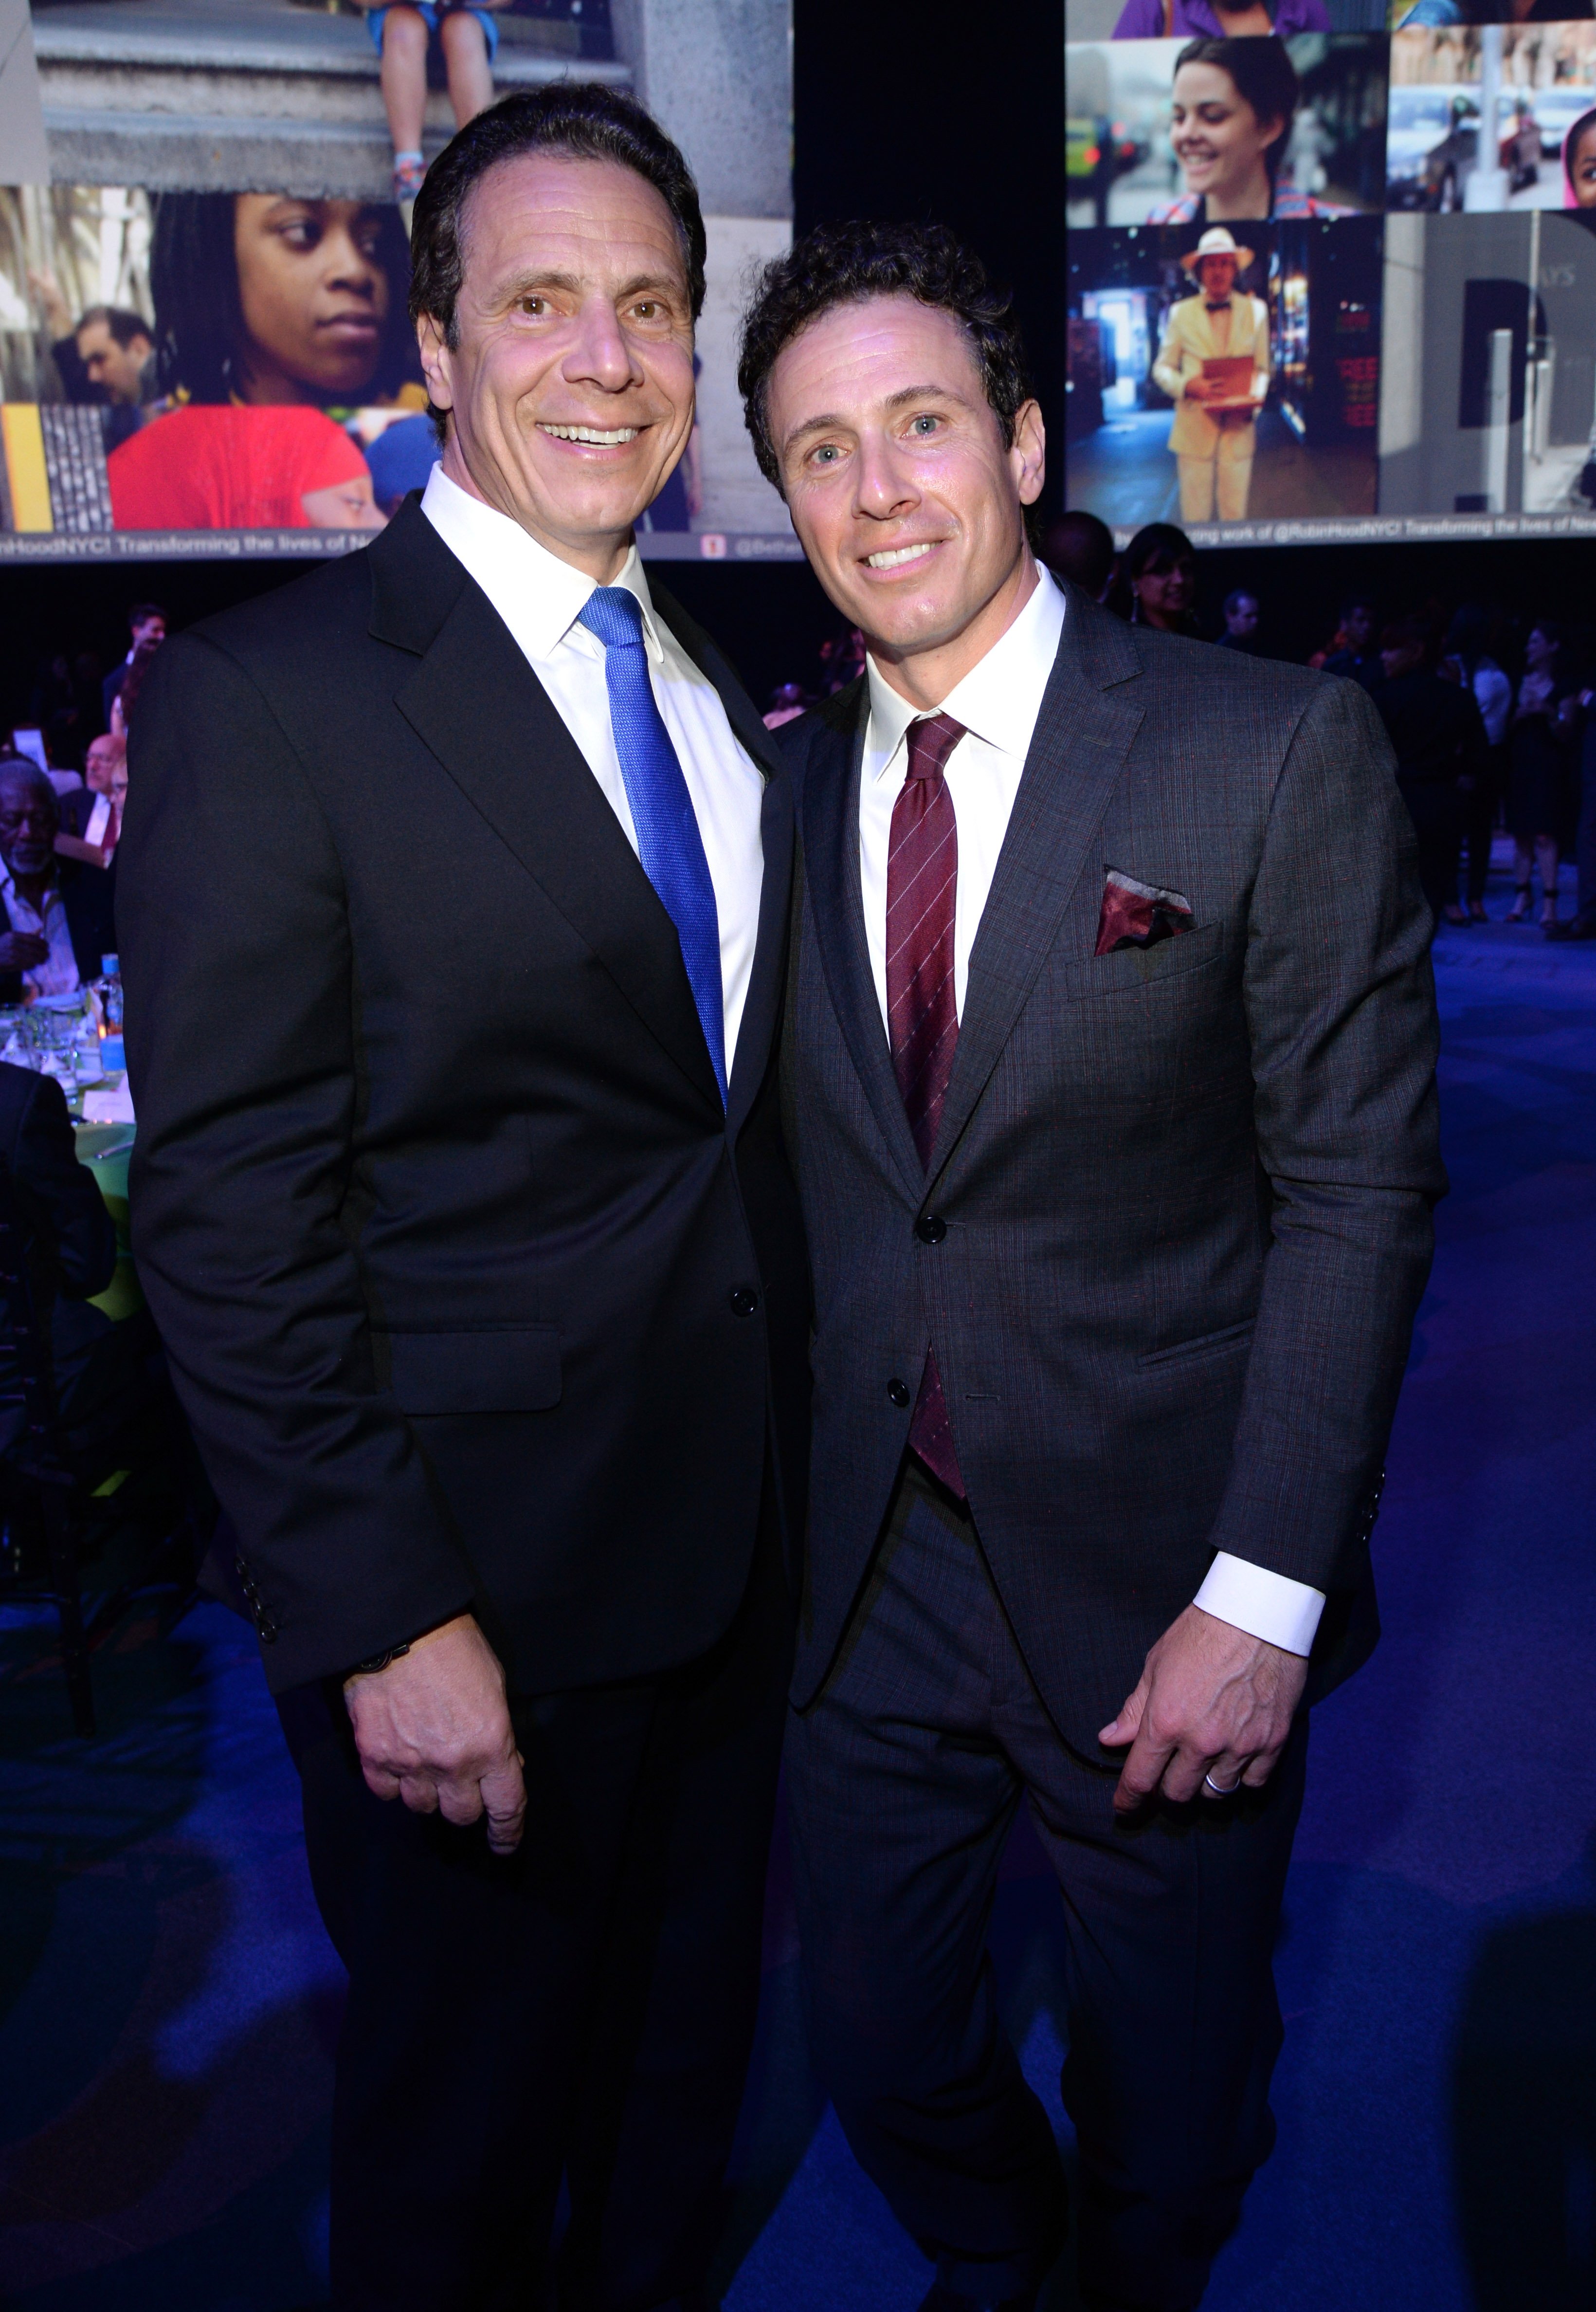 New York Governor Andrew Cuomo and Chris Cuomo attend The Robin Hood Foundation's 2015 Benefit on May 12, 2015. | Photo: Getty Images.